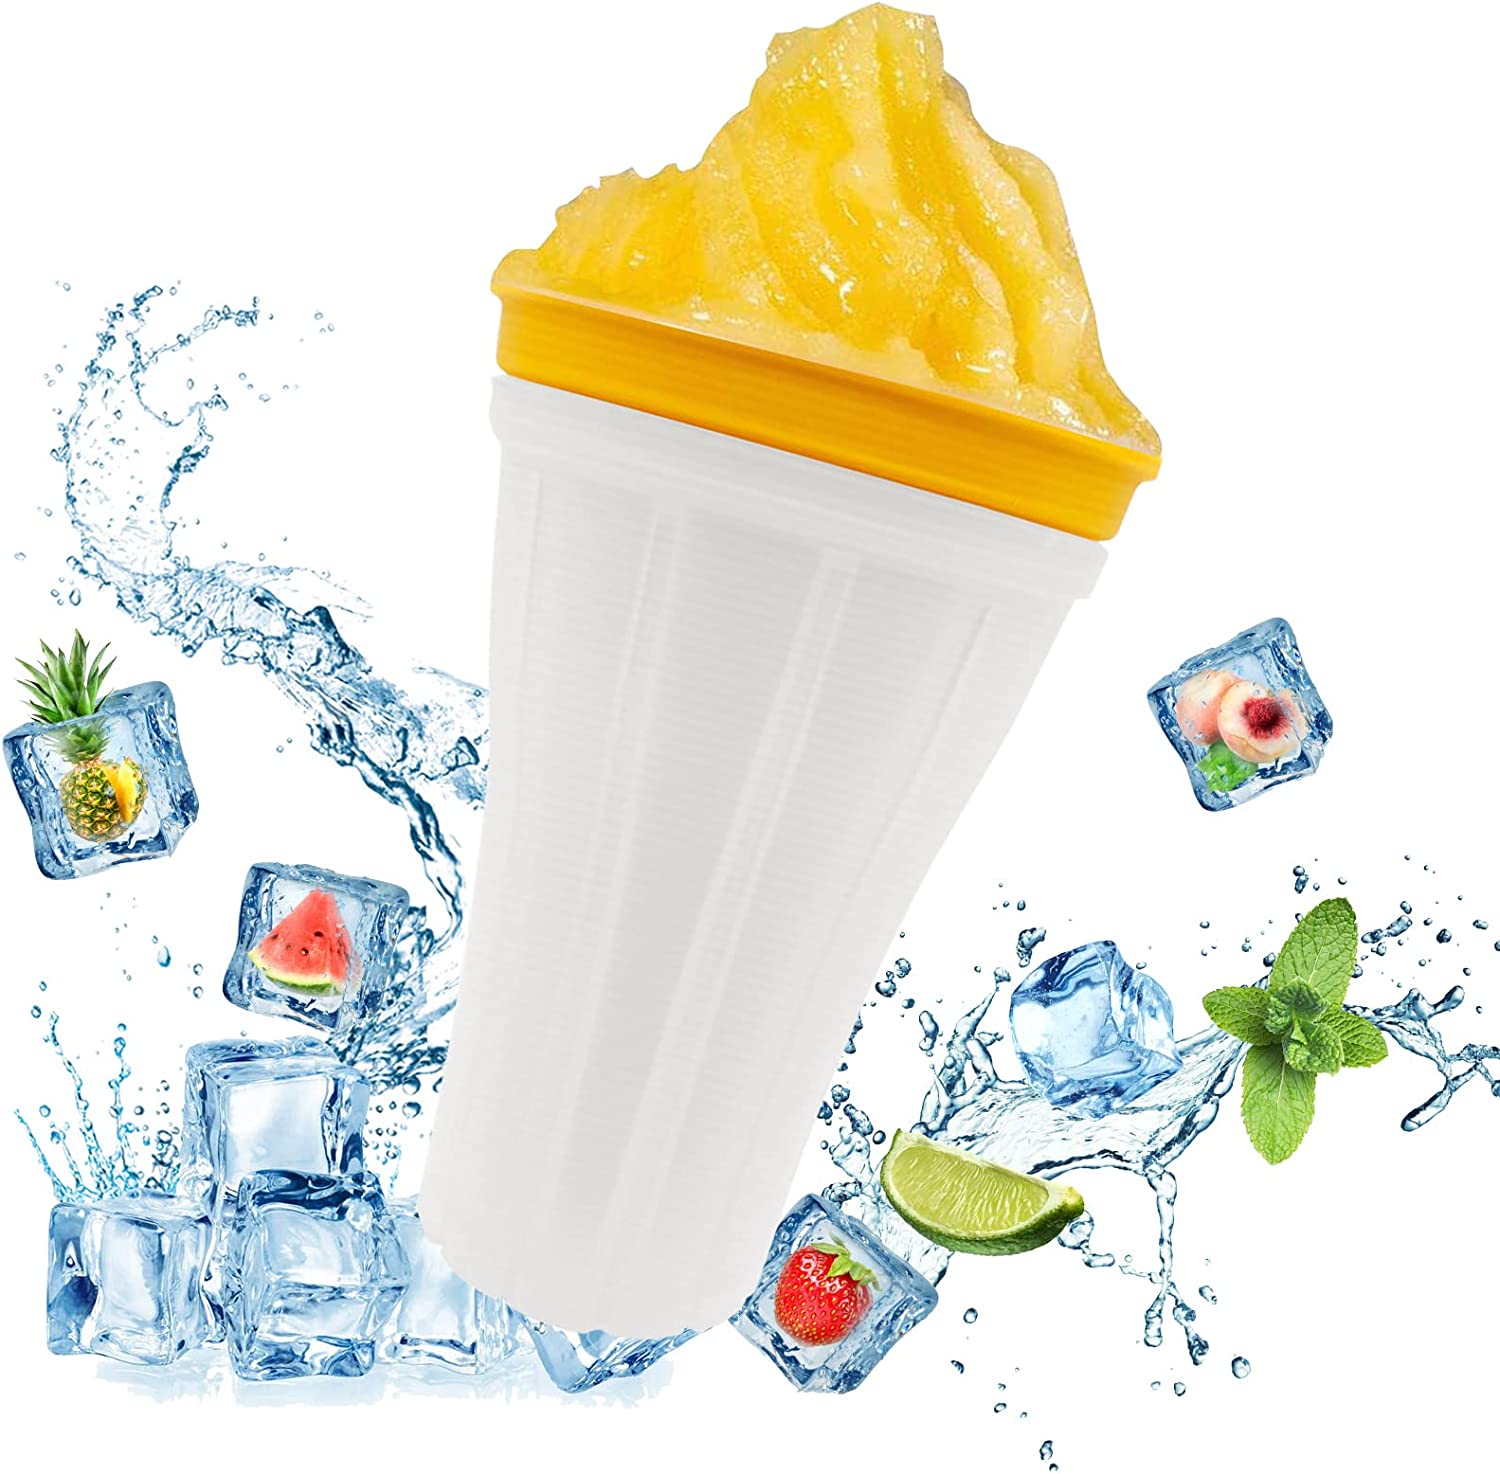 HeDaKang Slush Cup Machine Slushy Maker - Magic Cup Ice Moulds Smoothie Maker To Go Ice Cream Cup Slushy Cup Slushy Maker Cups Ice Moulds Silicone Ice Cream Container for Family in Summer Yellow